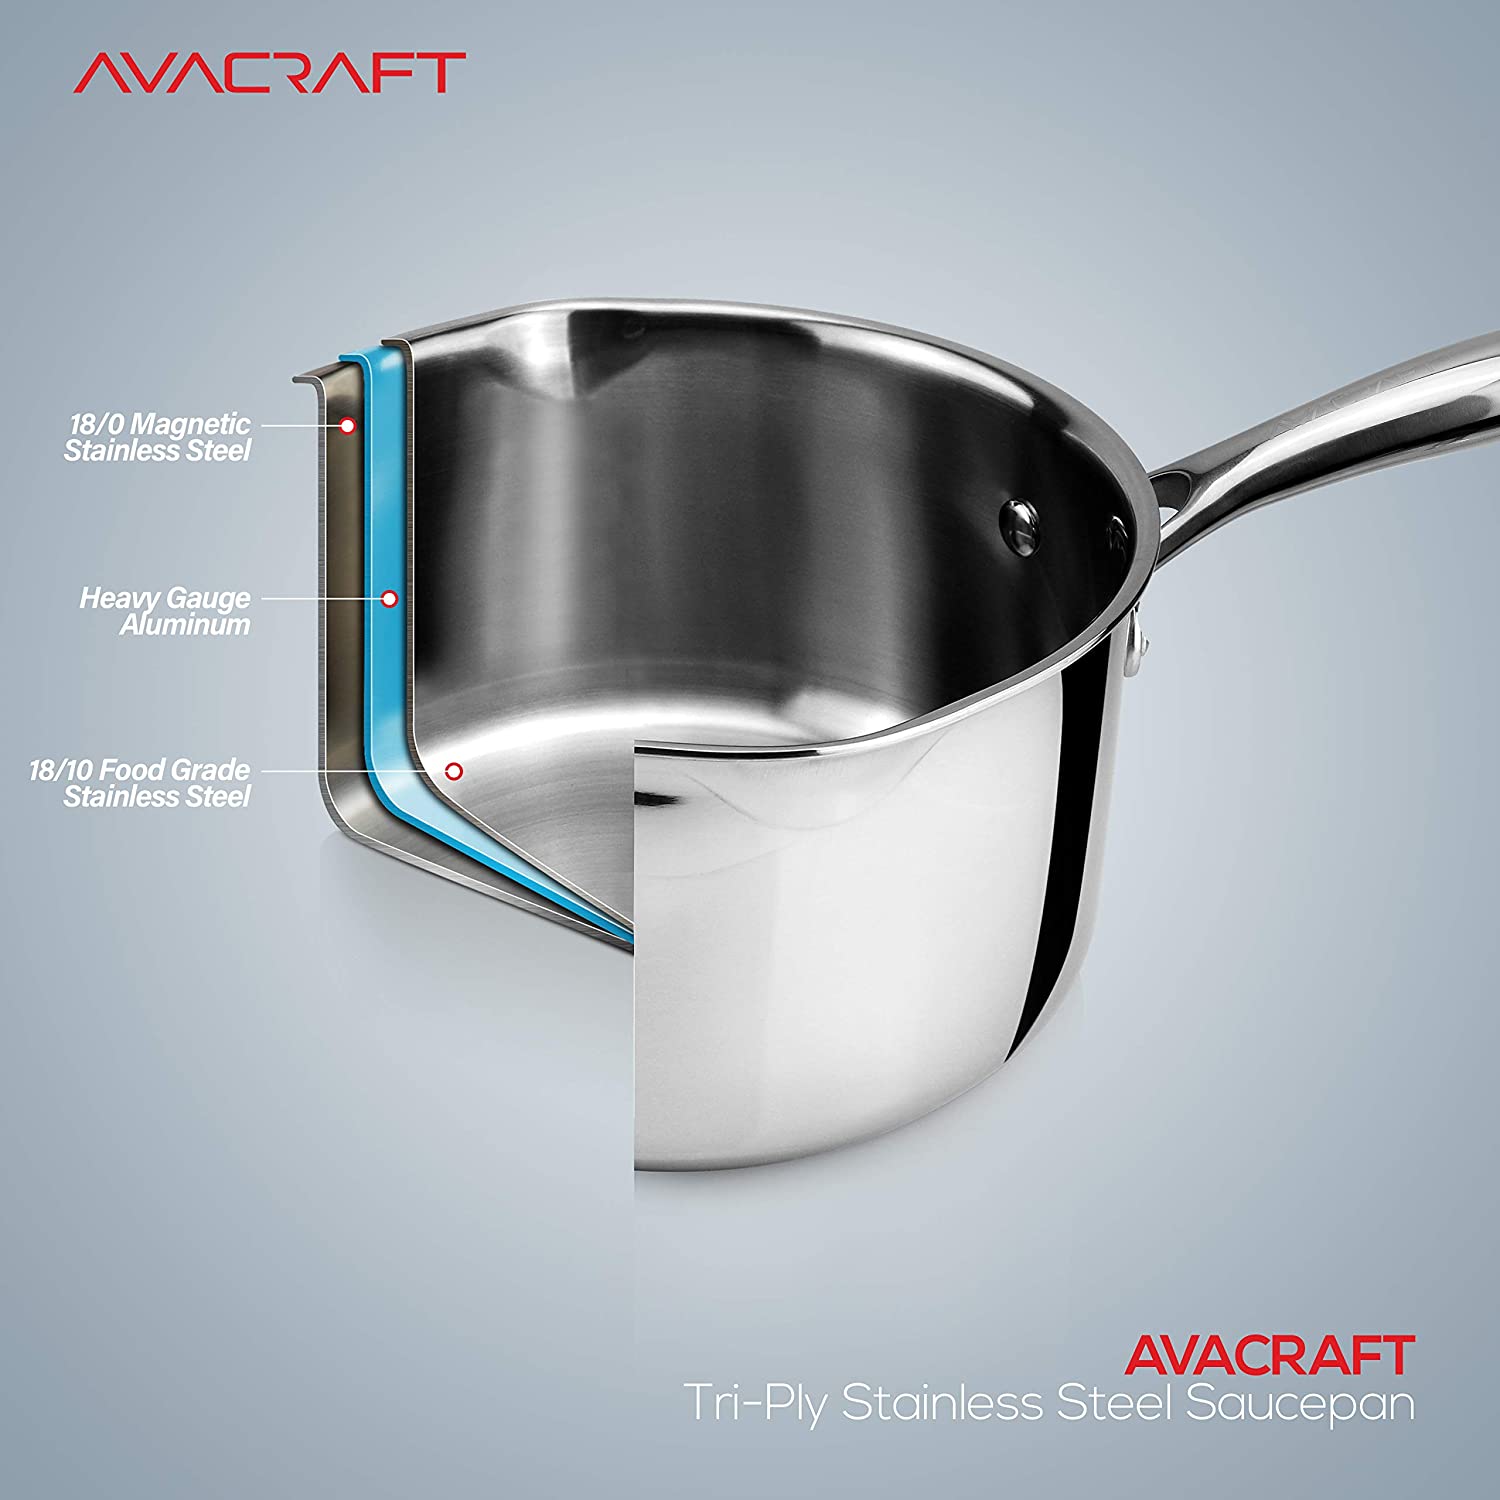 AVACRAFT Top Rated Tri-Ply Stainless Steel Saucepan with Glass Strainer Lid, Two Side Spouts, Ergonomic Handle (Tri-Ply Full Body, 3.5 Quart)